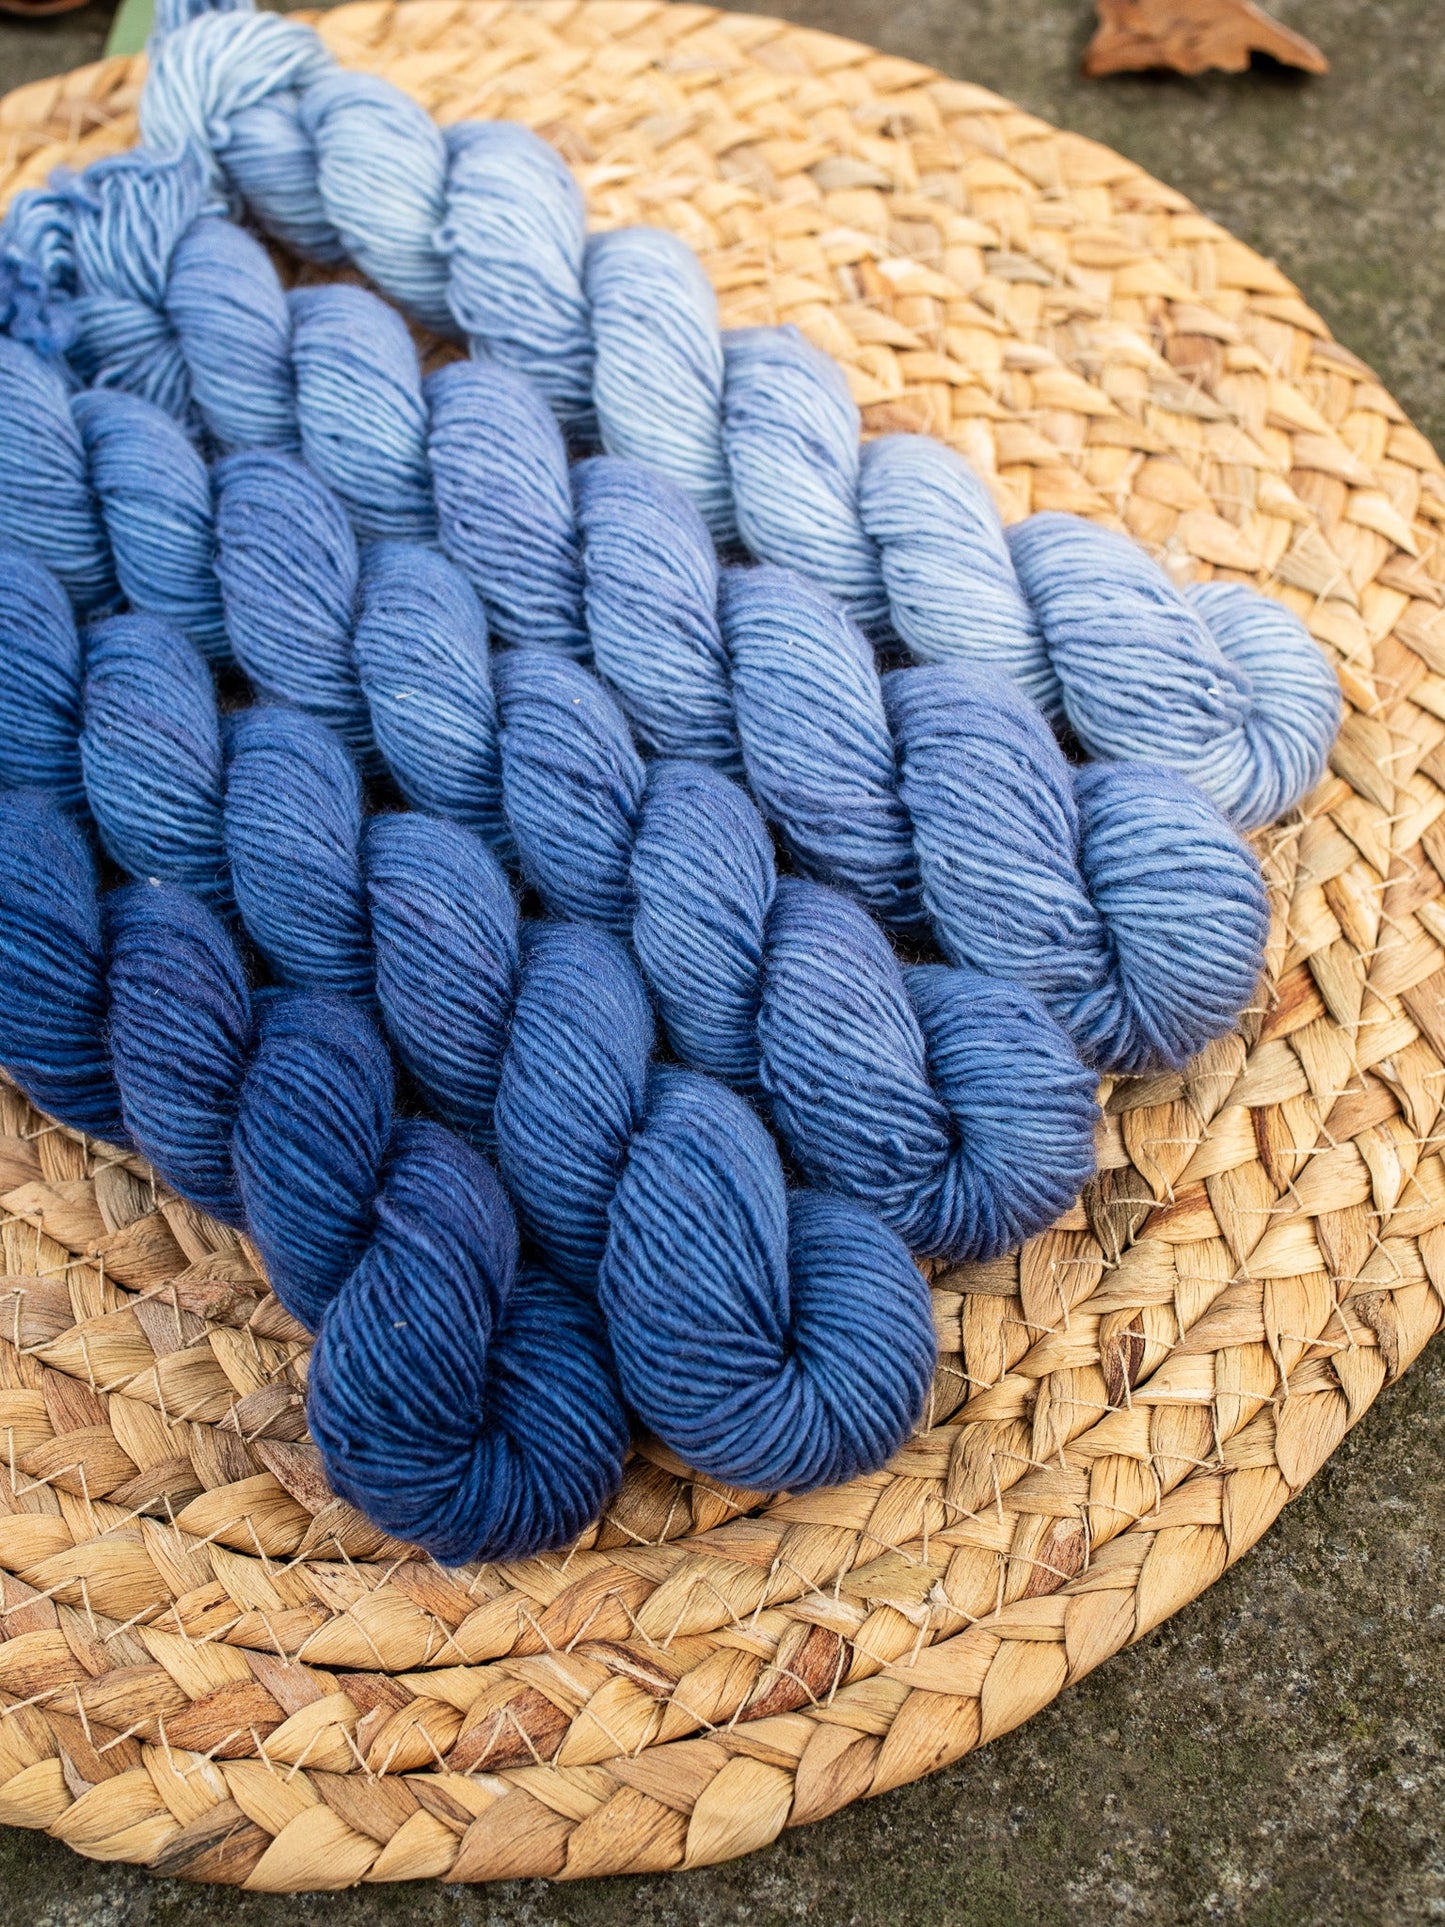 5 mini skeins of hand dyed yarn in a gradient/fade set in color denim blue.